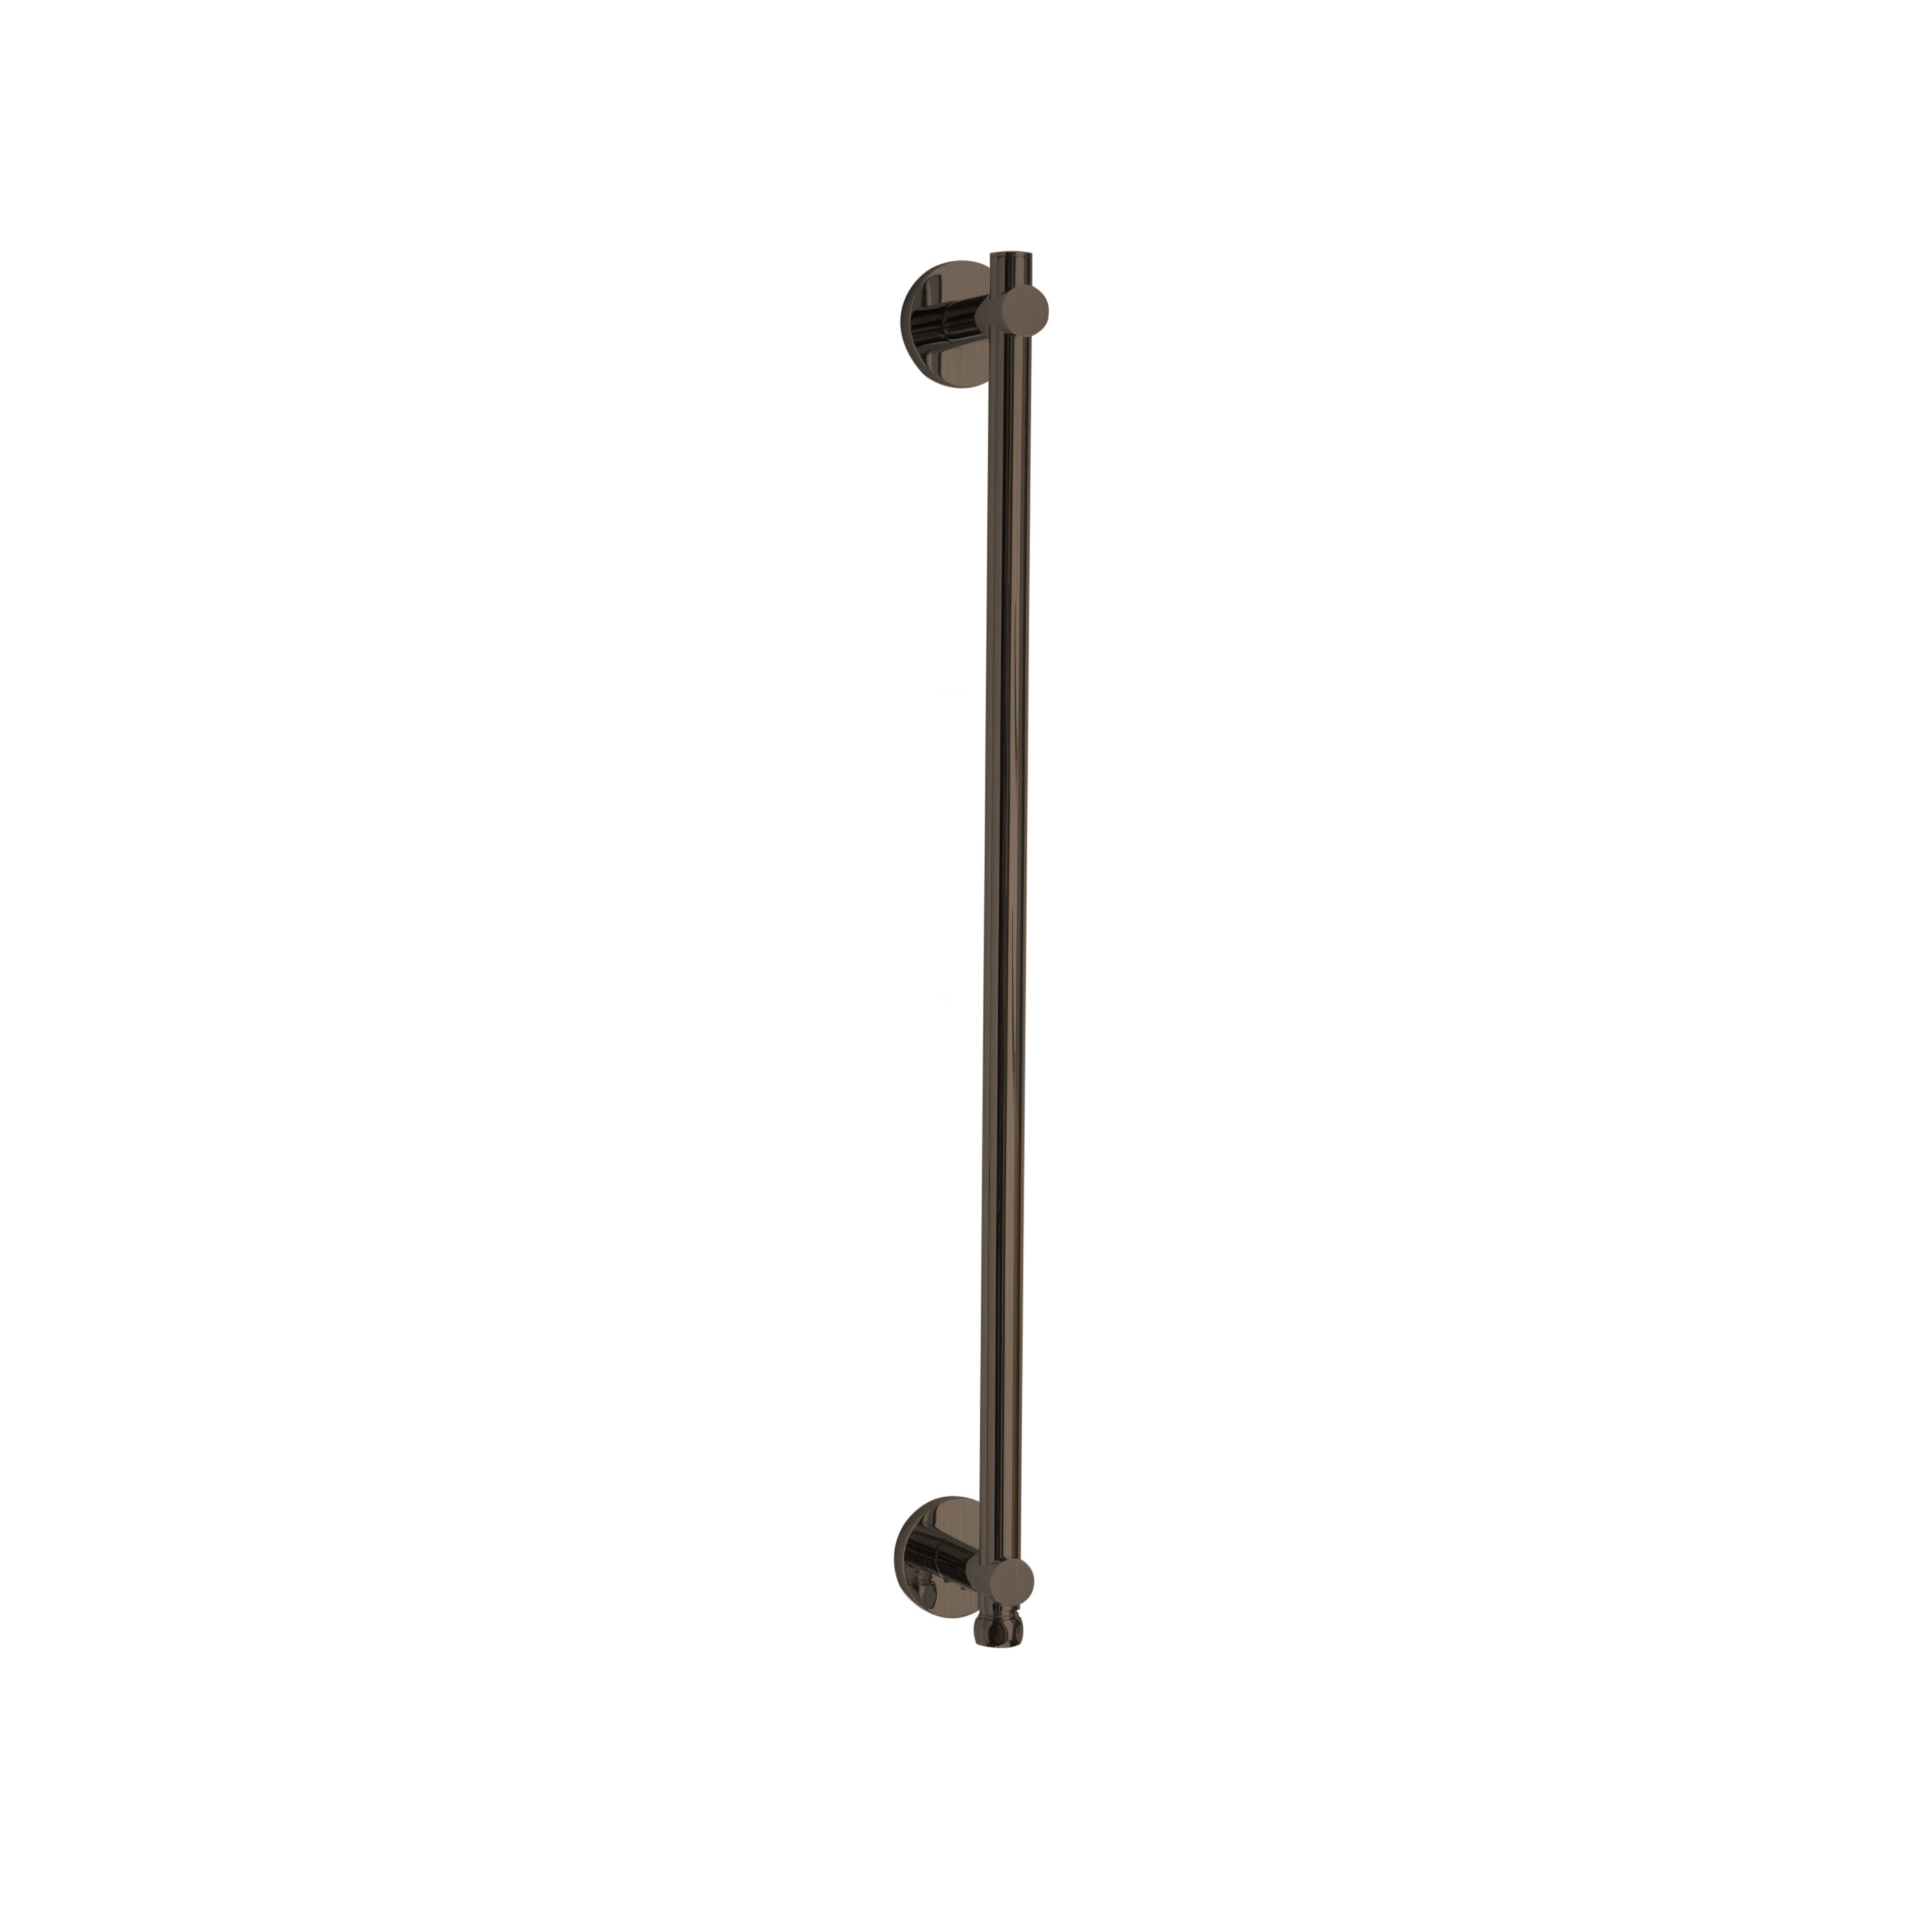 Thermasol 15-1002-ORB Shower Rail W/integral Water Way round - Oil Rubbed Bronze